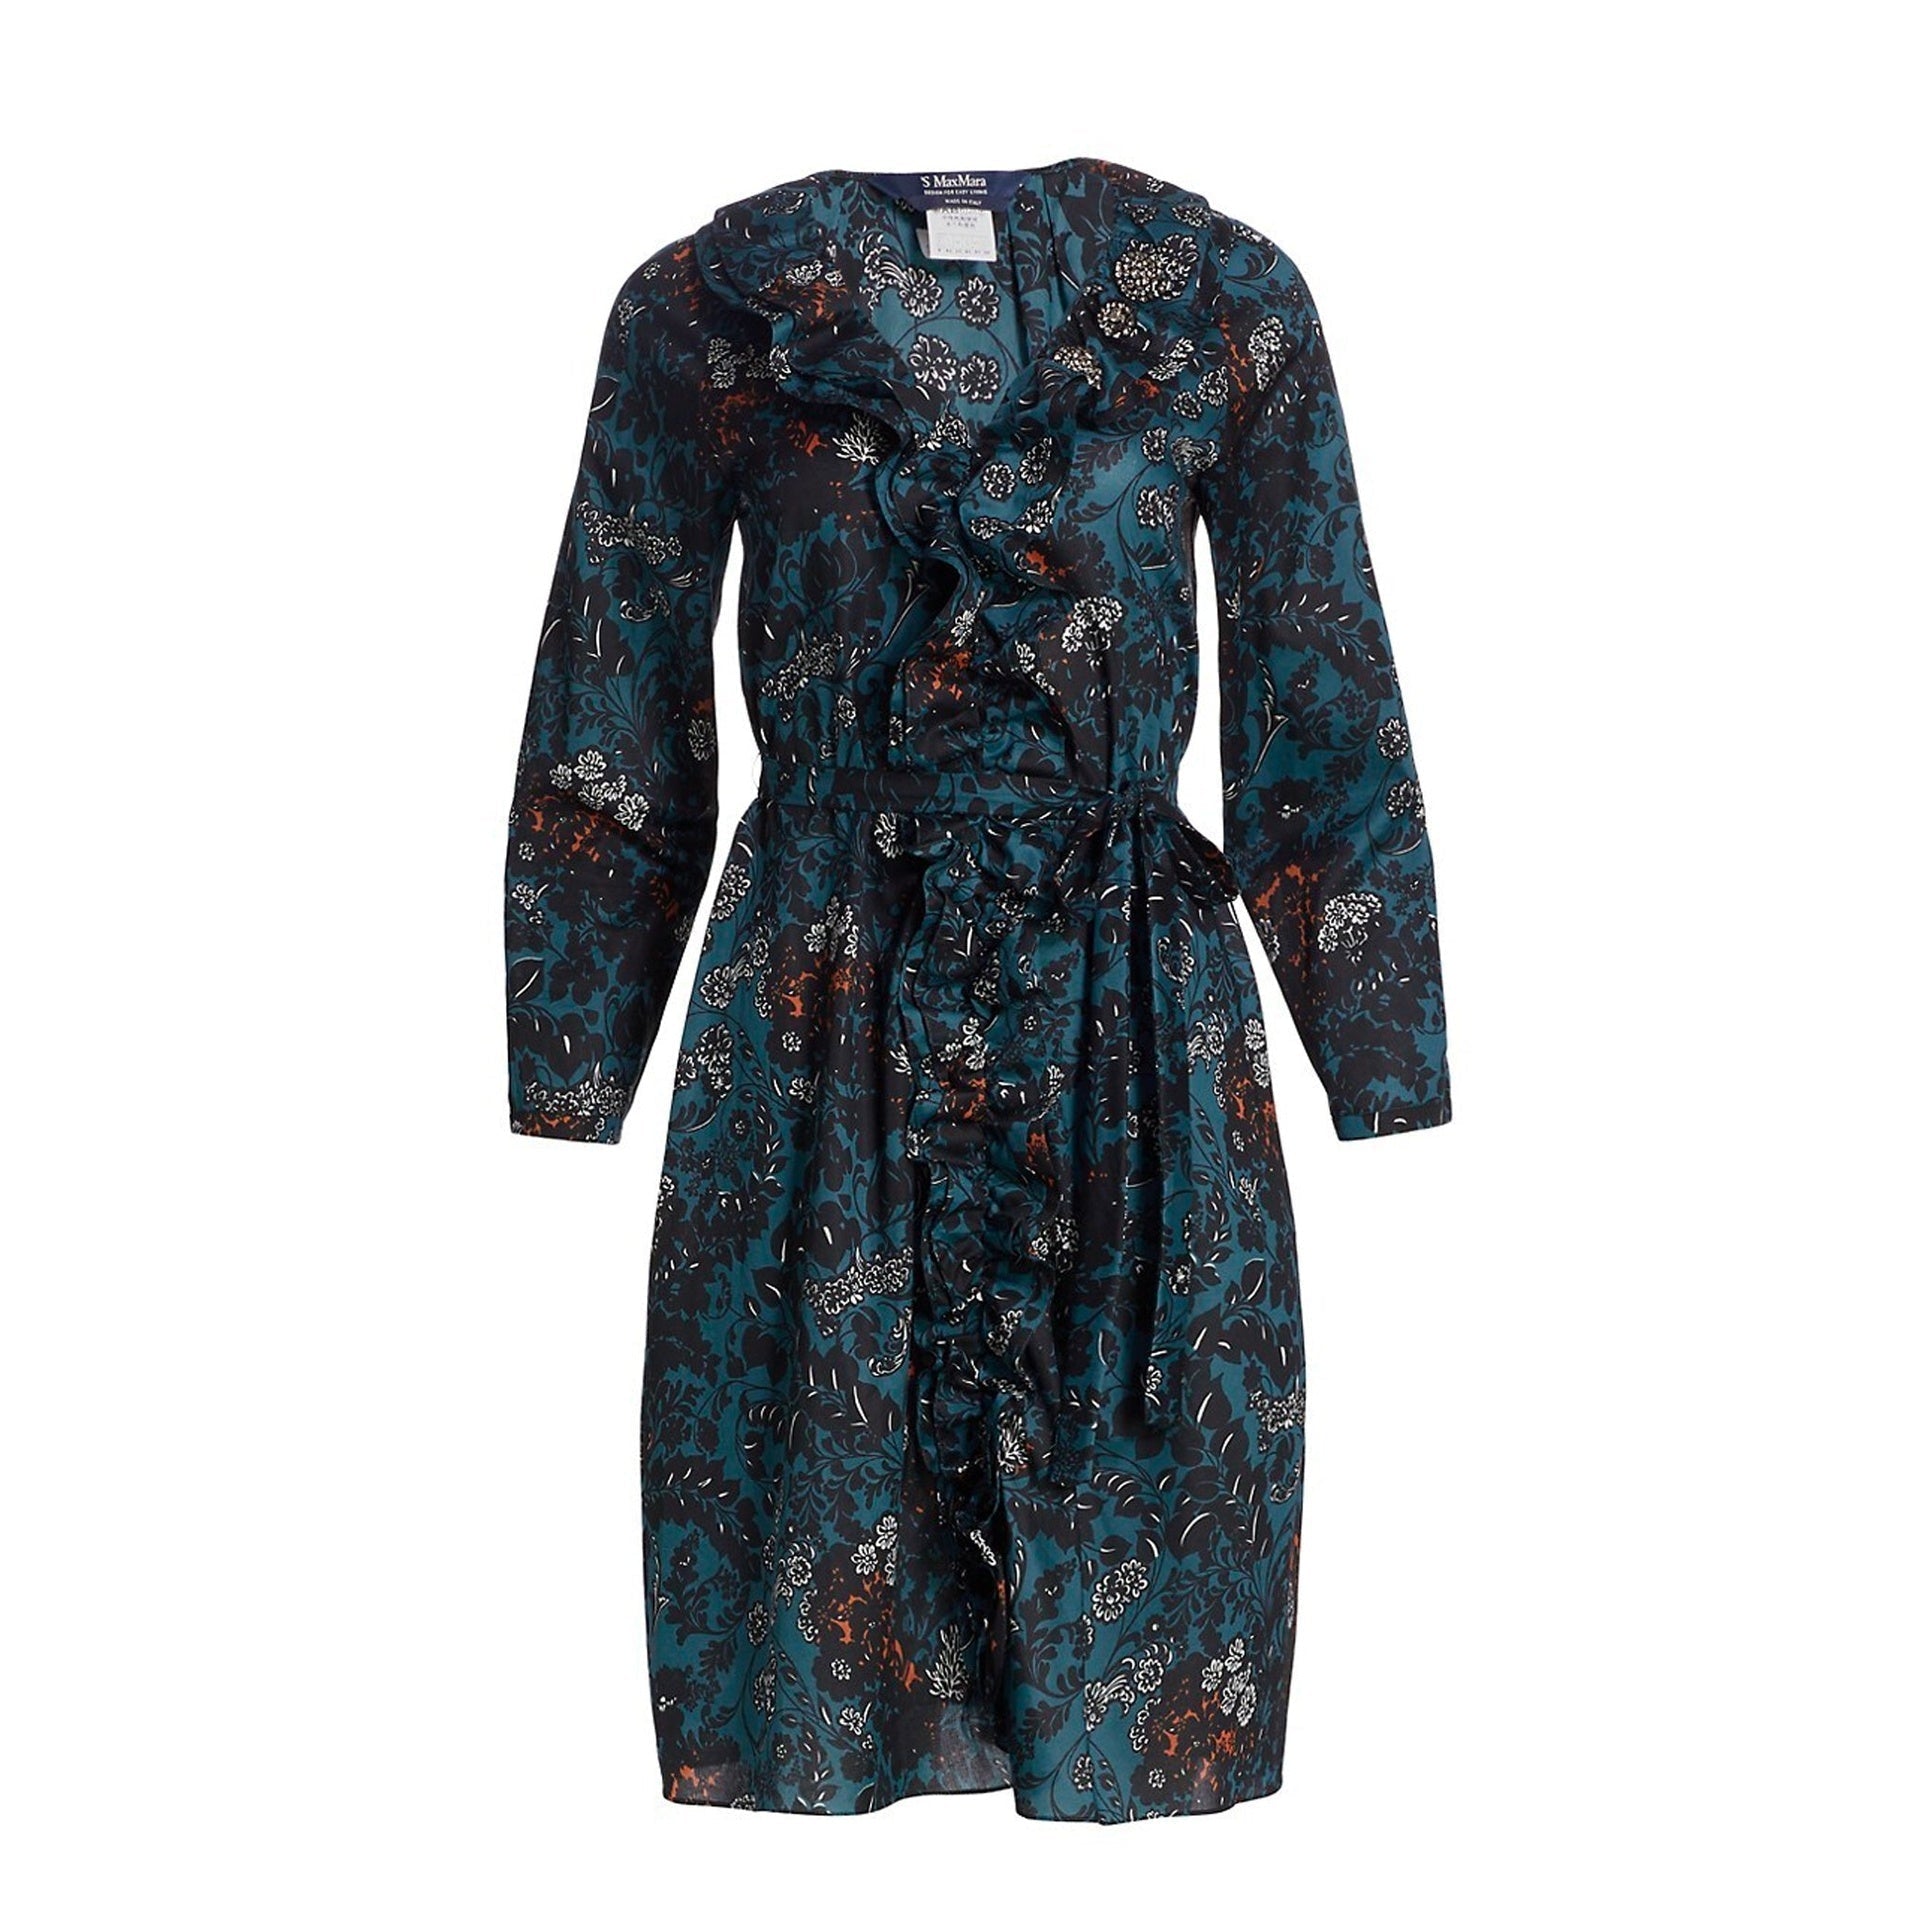 S-MAX-MARA-OUTLET-SALE-s-Max-Mara-Fiorito-Floral-Dress-Kleider-Rocke-BLUE-42-ARCHIVE-COLLECTION.jpg